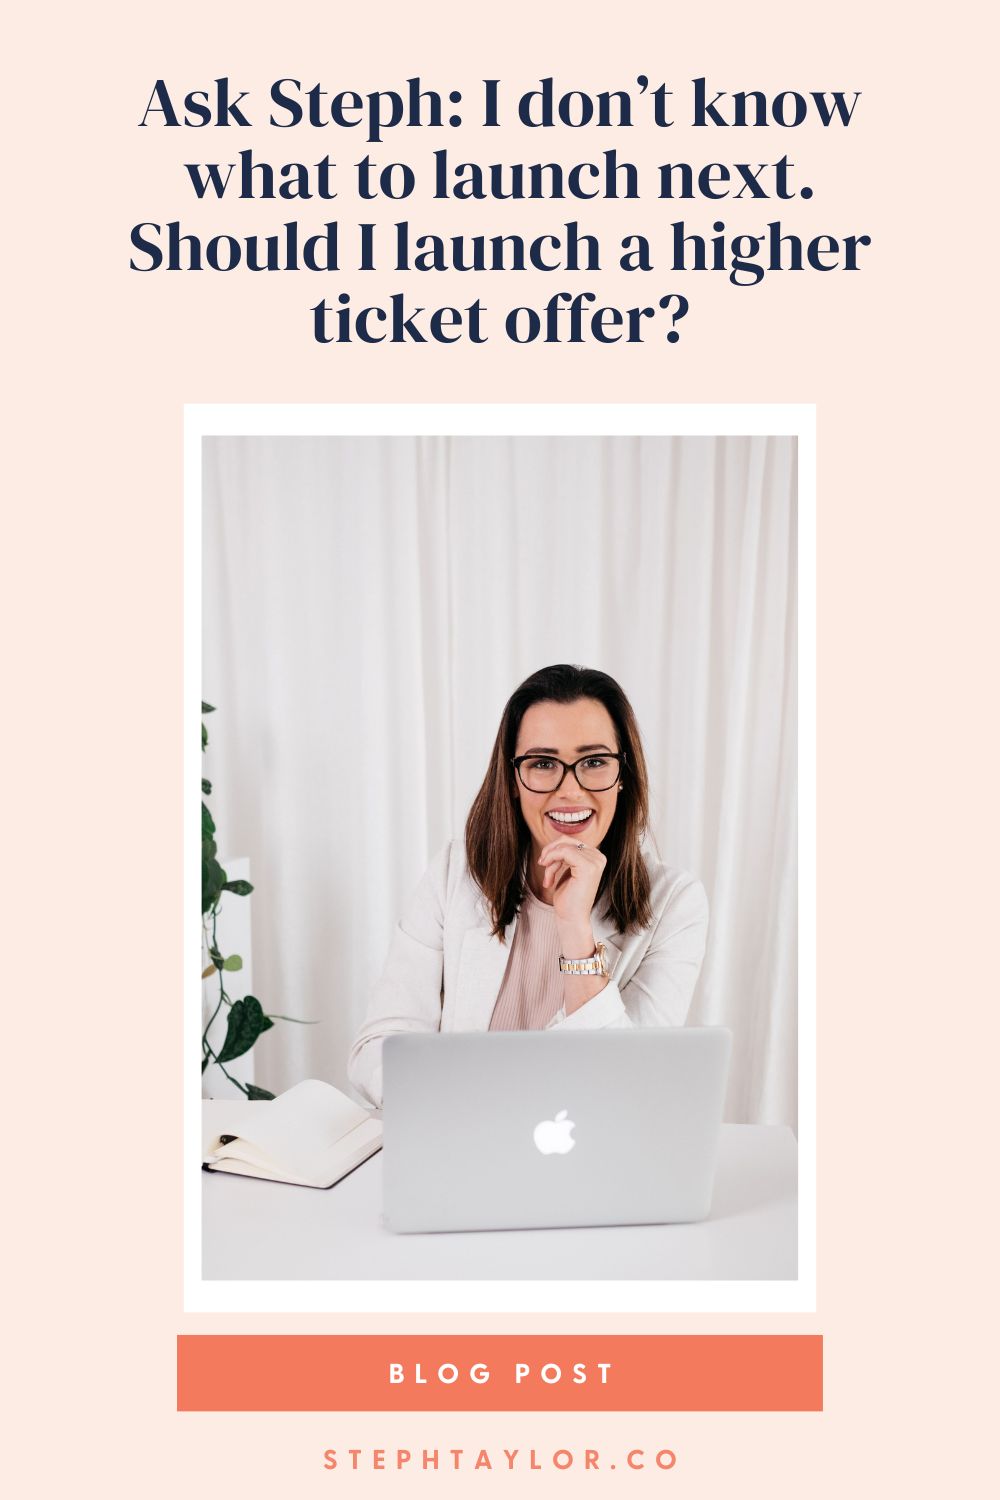 Ask Steph: I don’t know what to launch next. Should I launch a higher ticket offer?